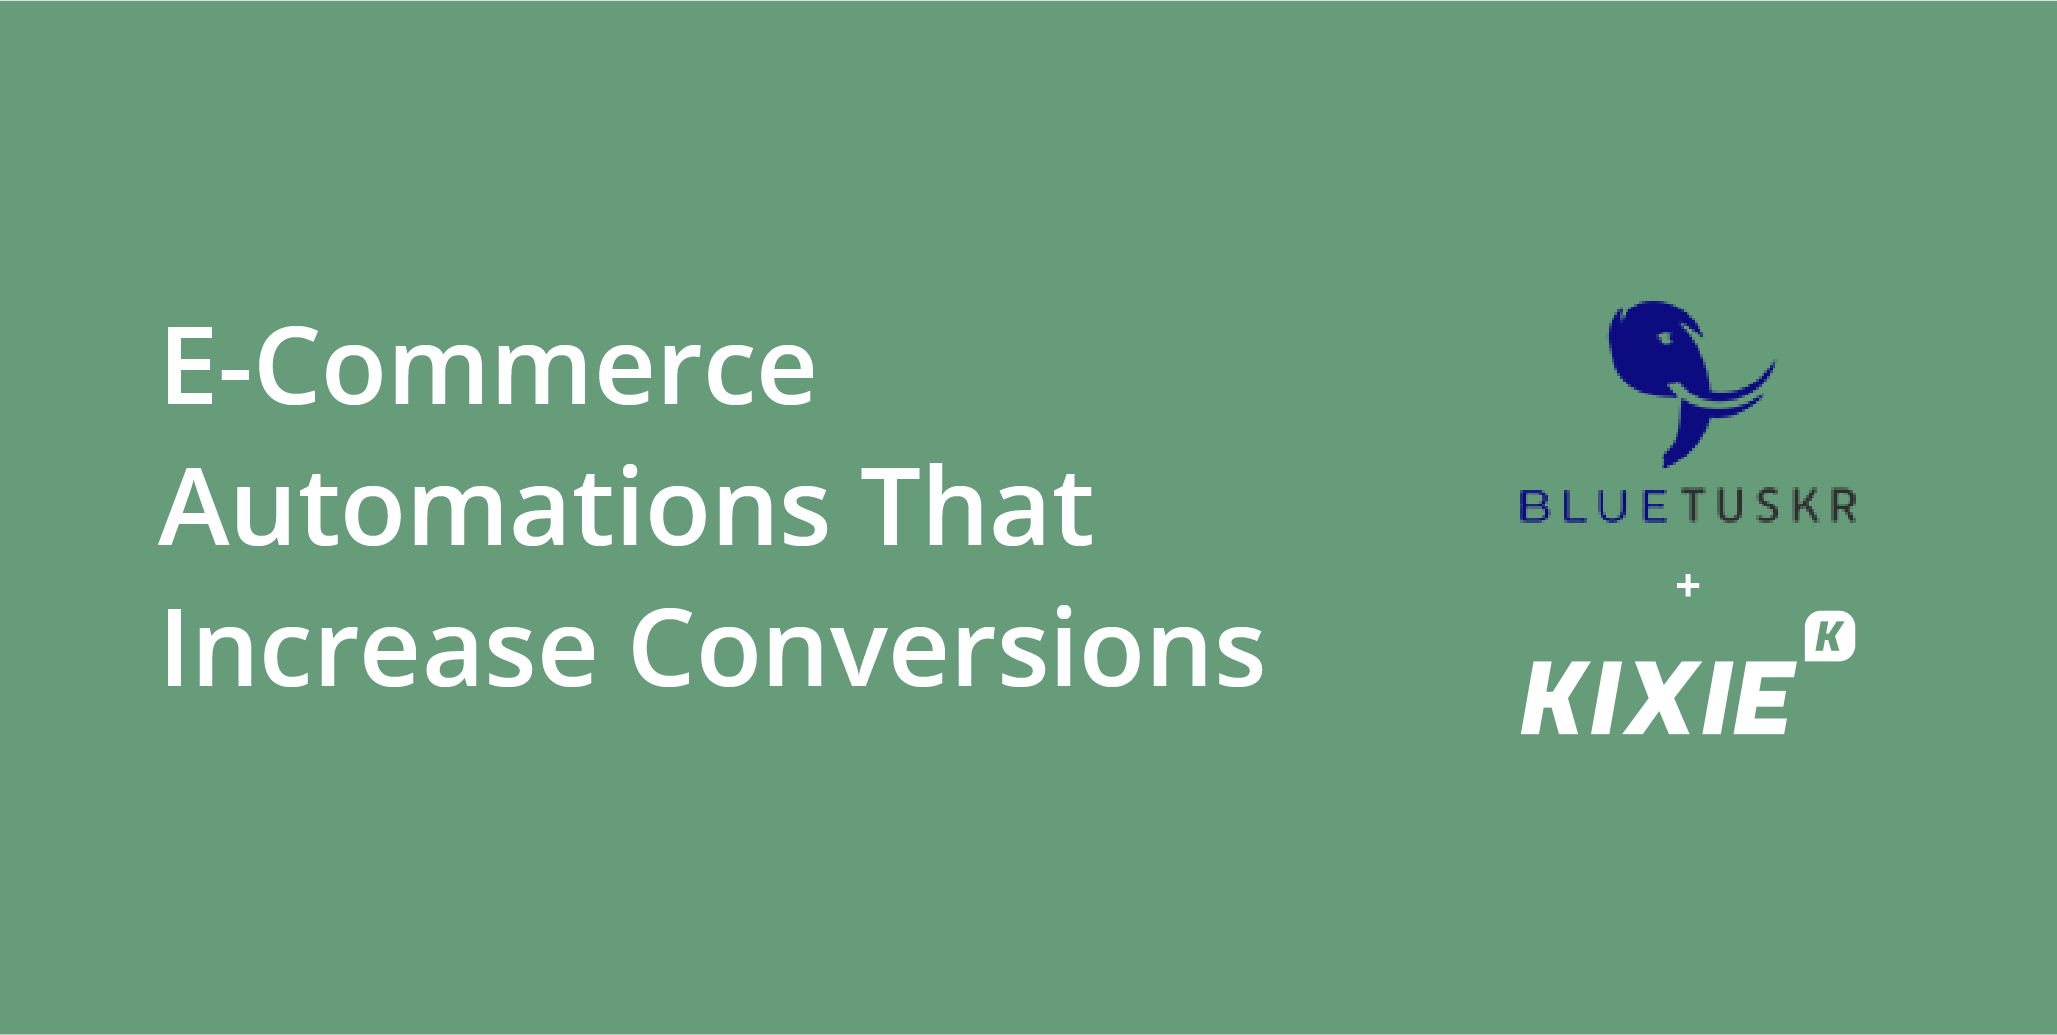 E-Commerce Automations That Increase Conversions | BlueTuskr | Telephones for business